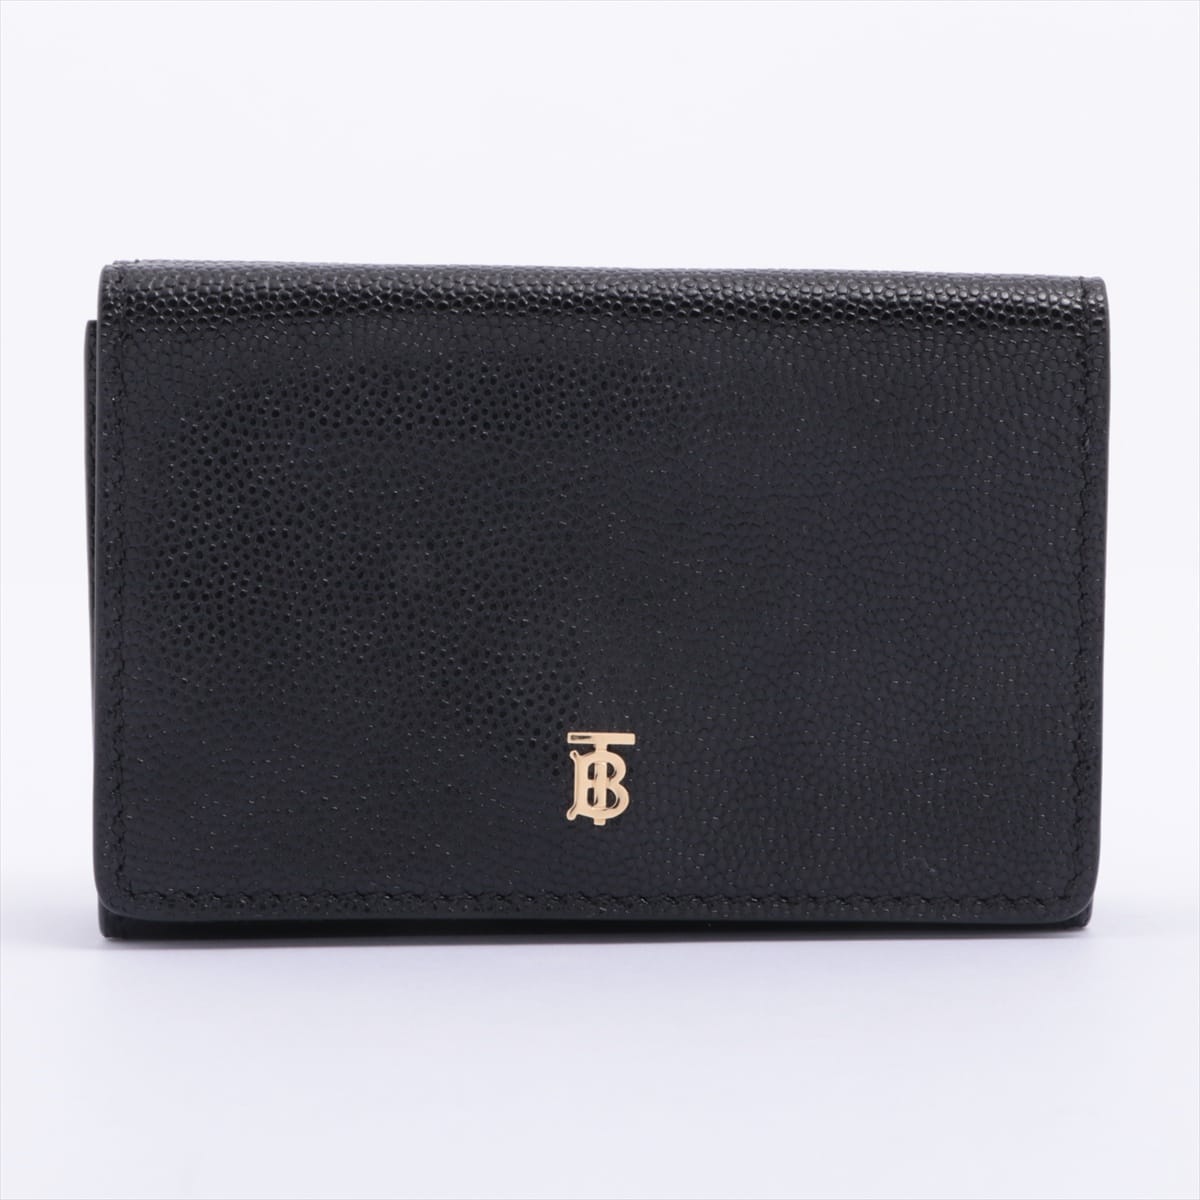 Burberry Leather Wallet Black